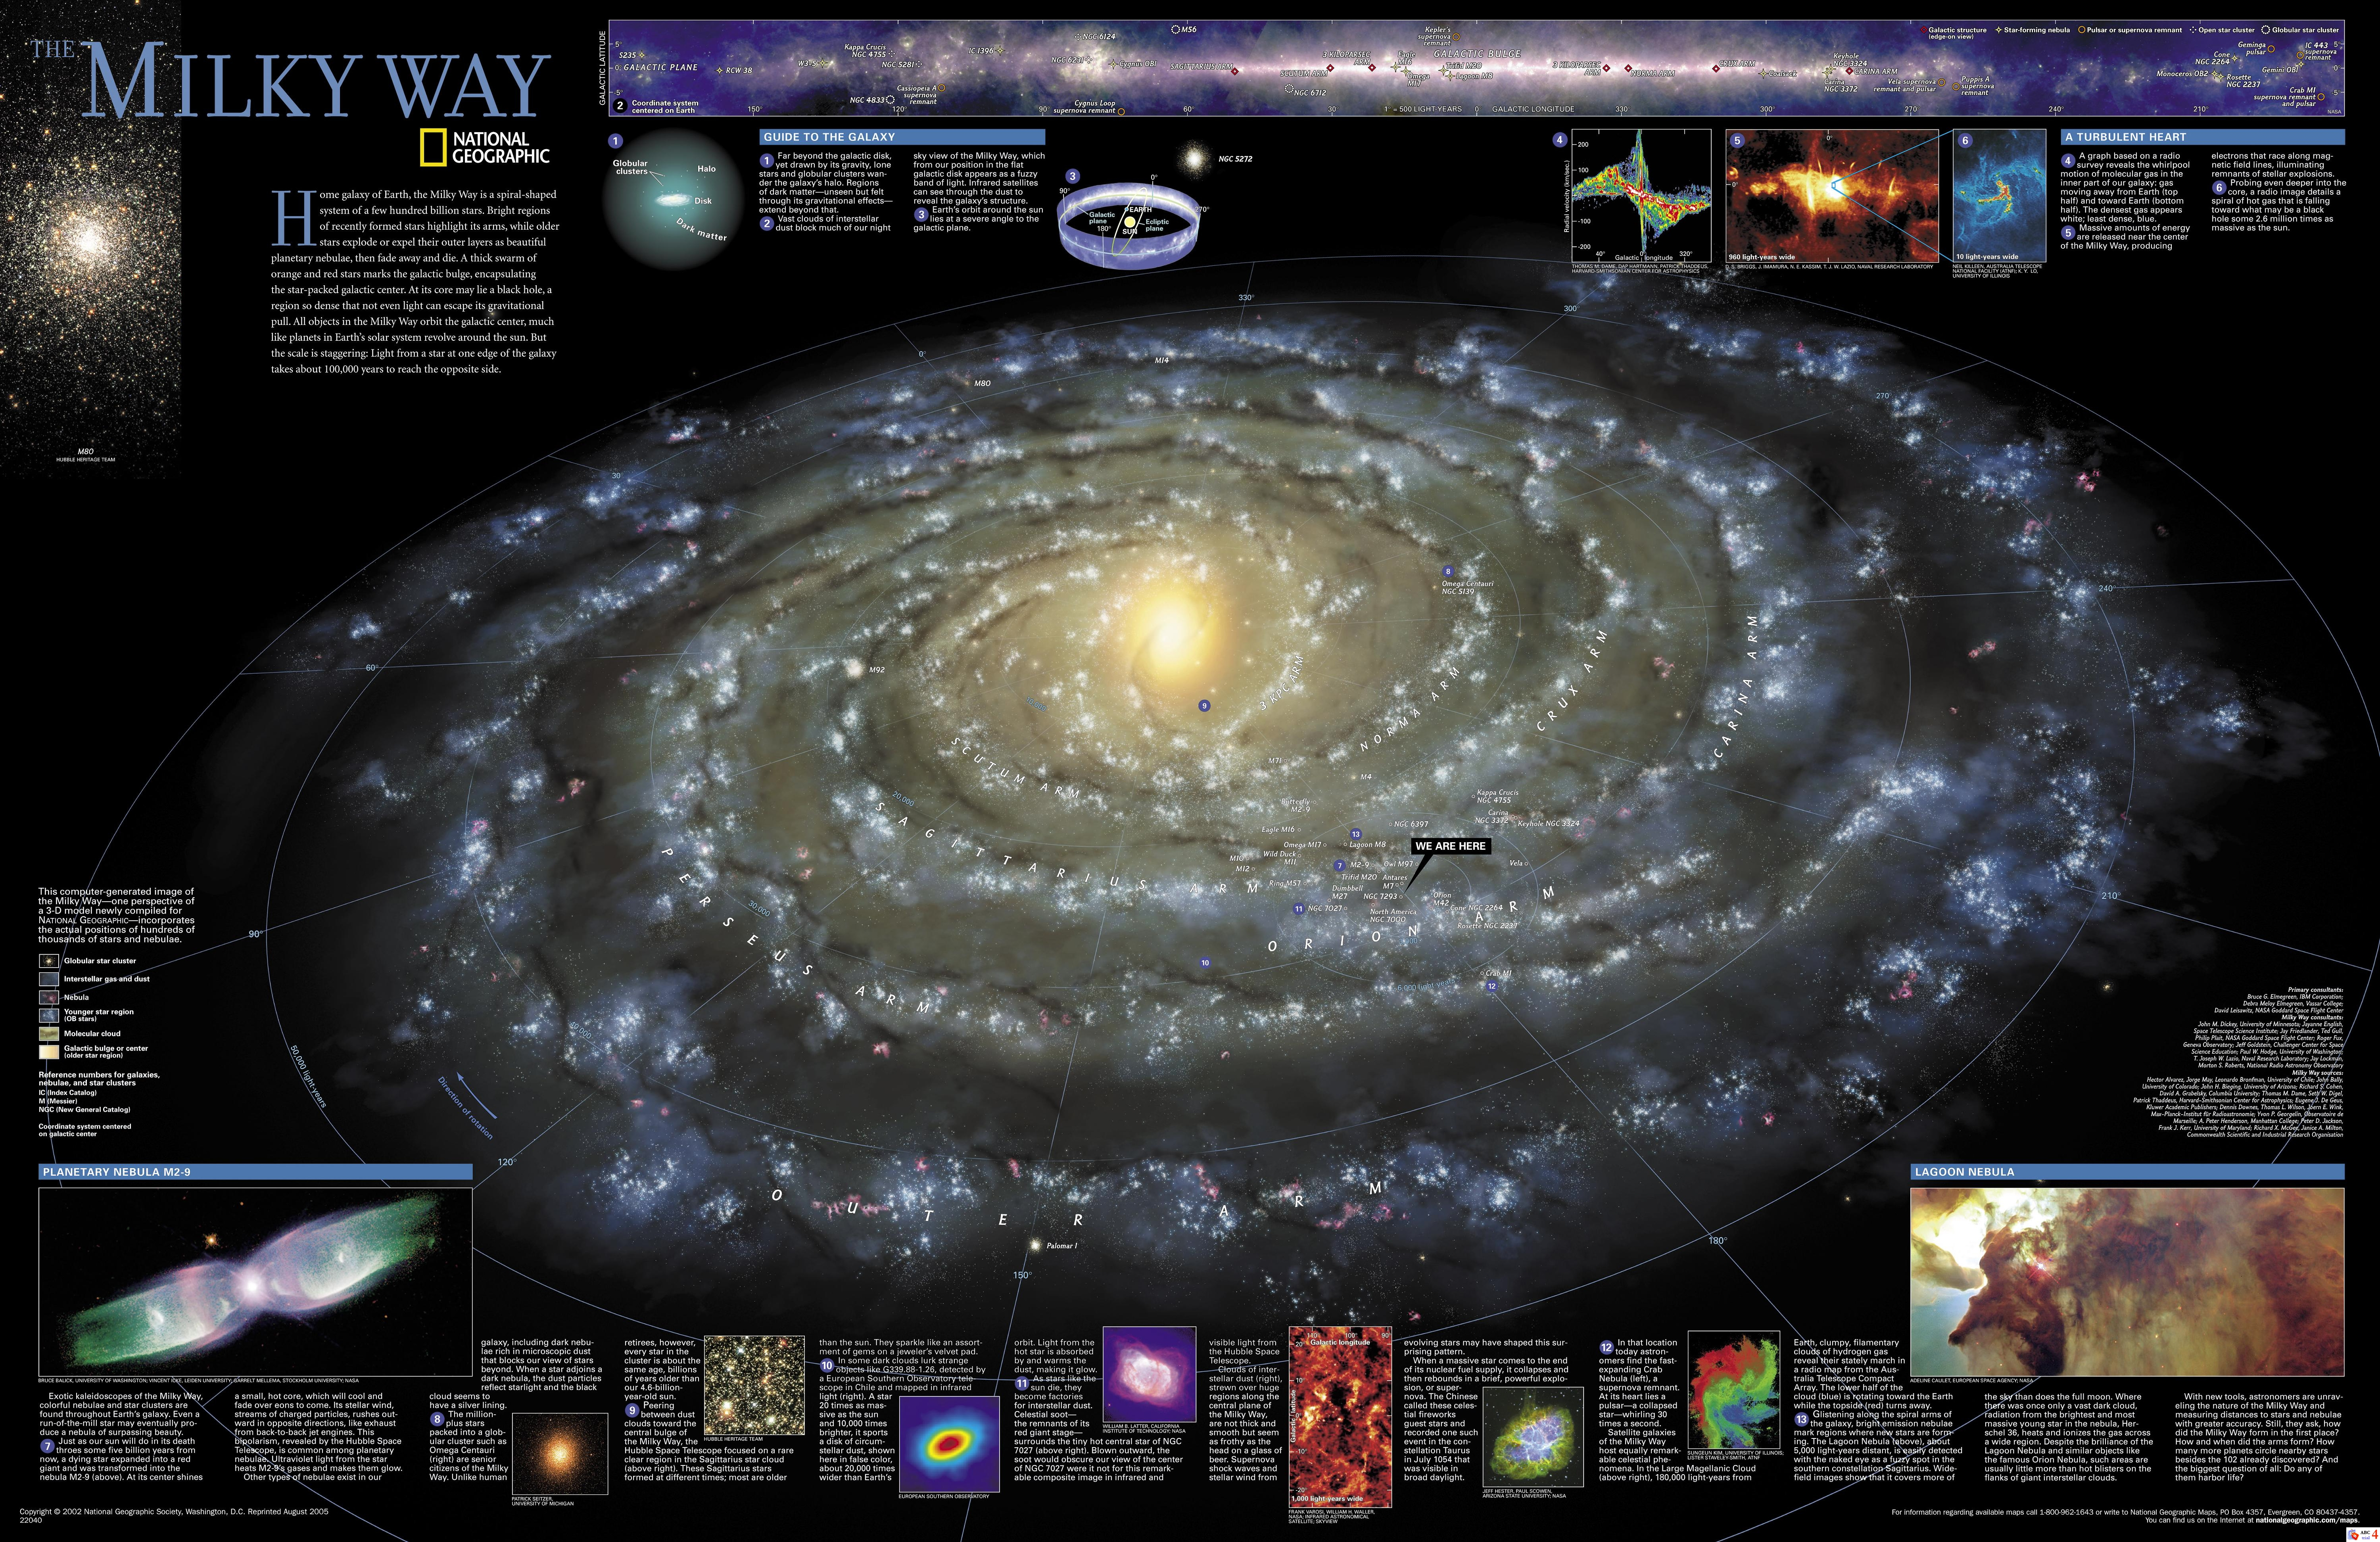 http://tzontonel.files.wordpress.com/2008/12/national-geographic-milky-way-reference-map1.jpg%3Fw%3D6000%26h%3D3887